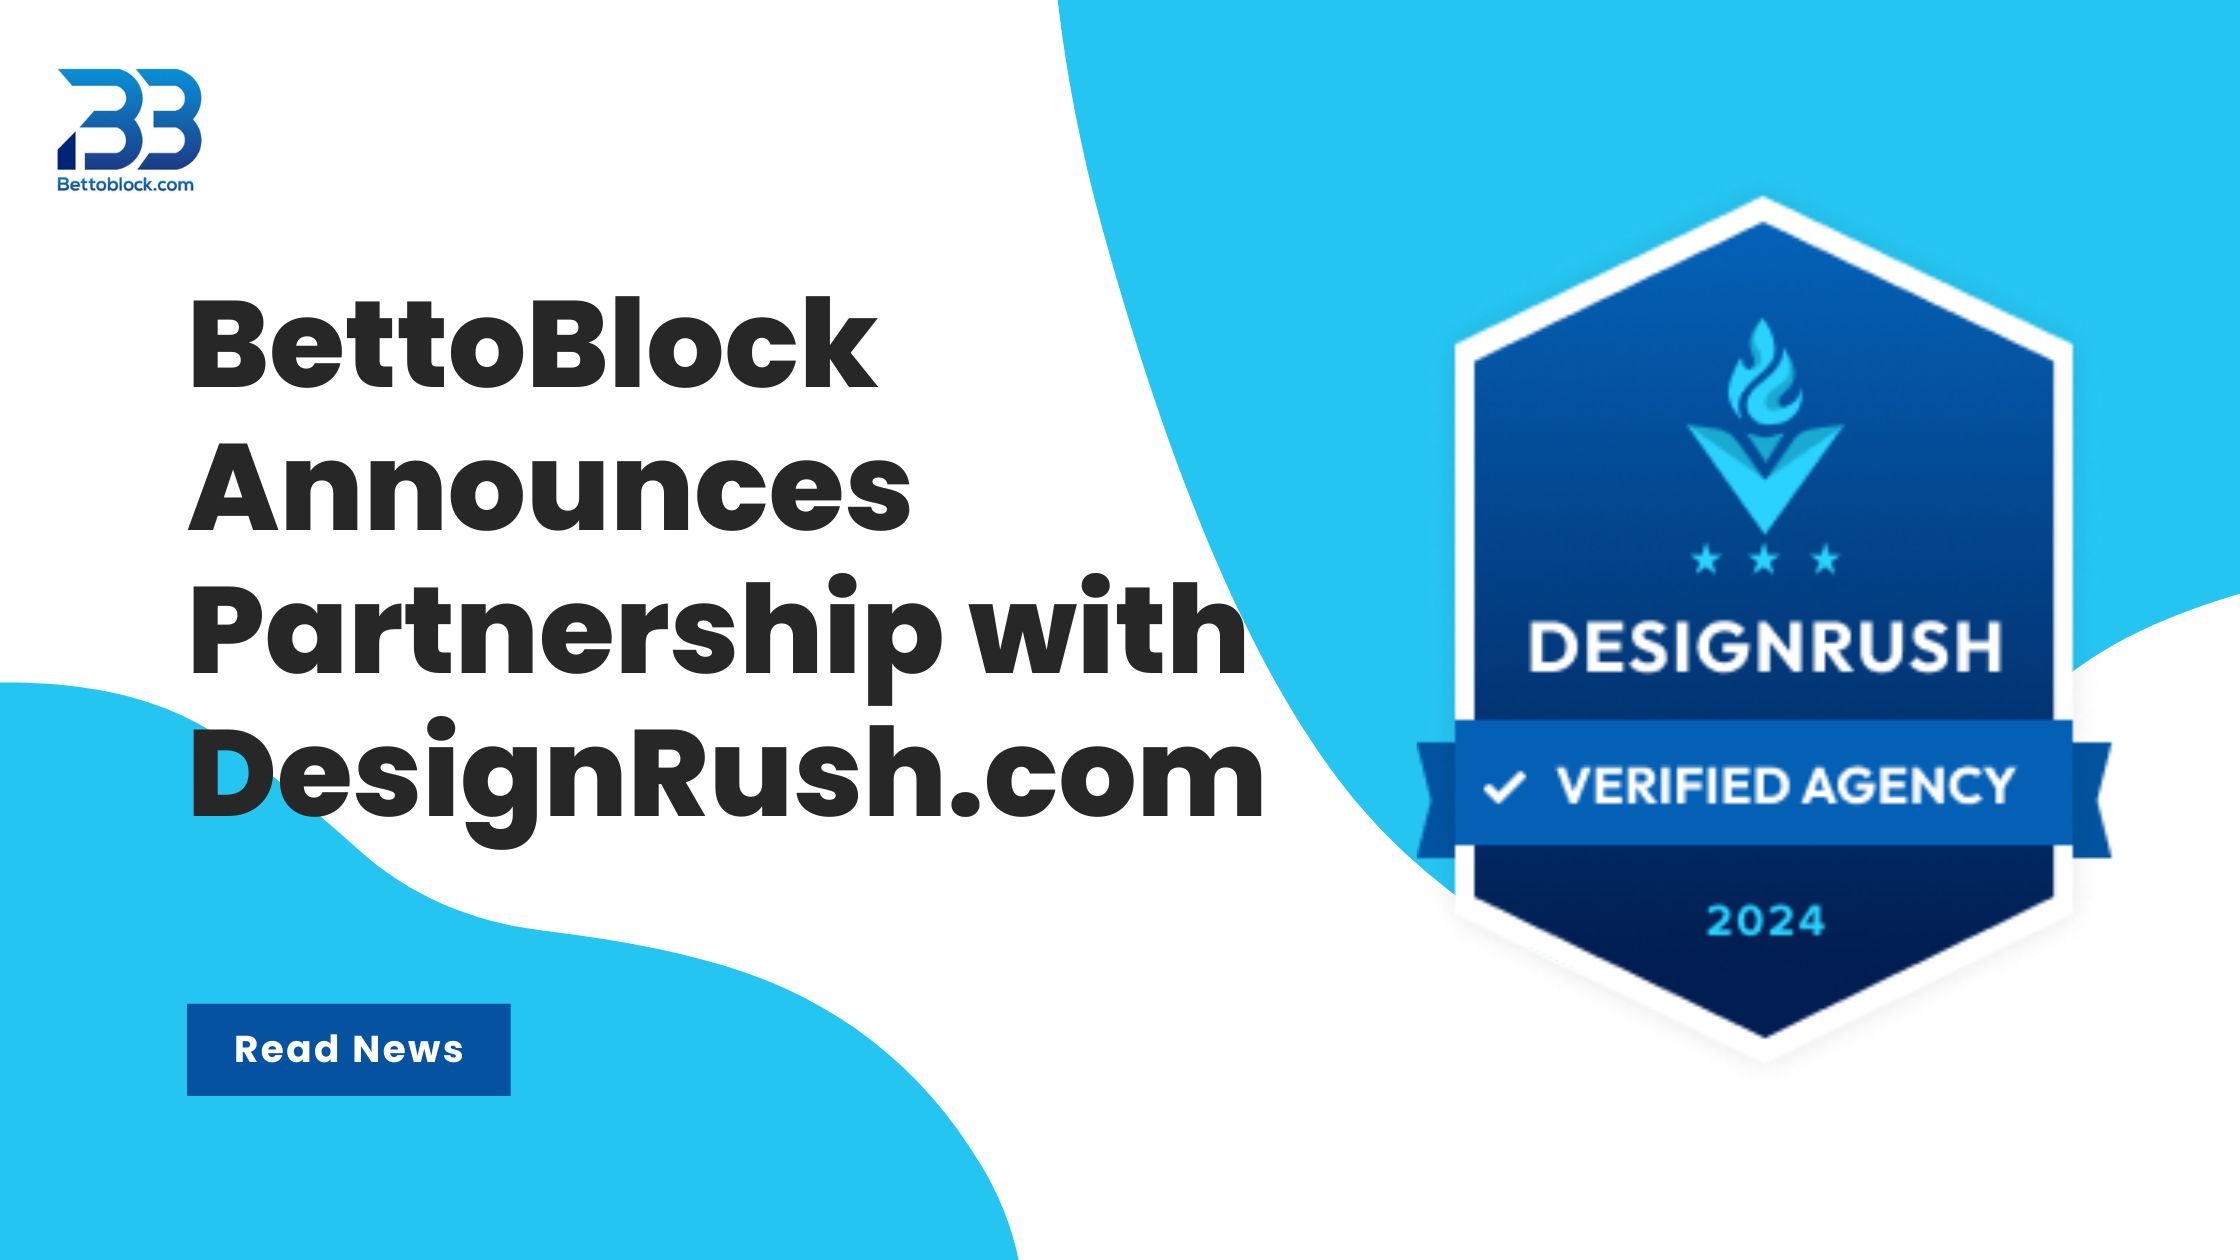 BettoBlock Partners with DesignRush to Showcase Expertise in Blockchain, AI, and Game Development